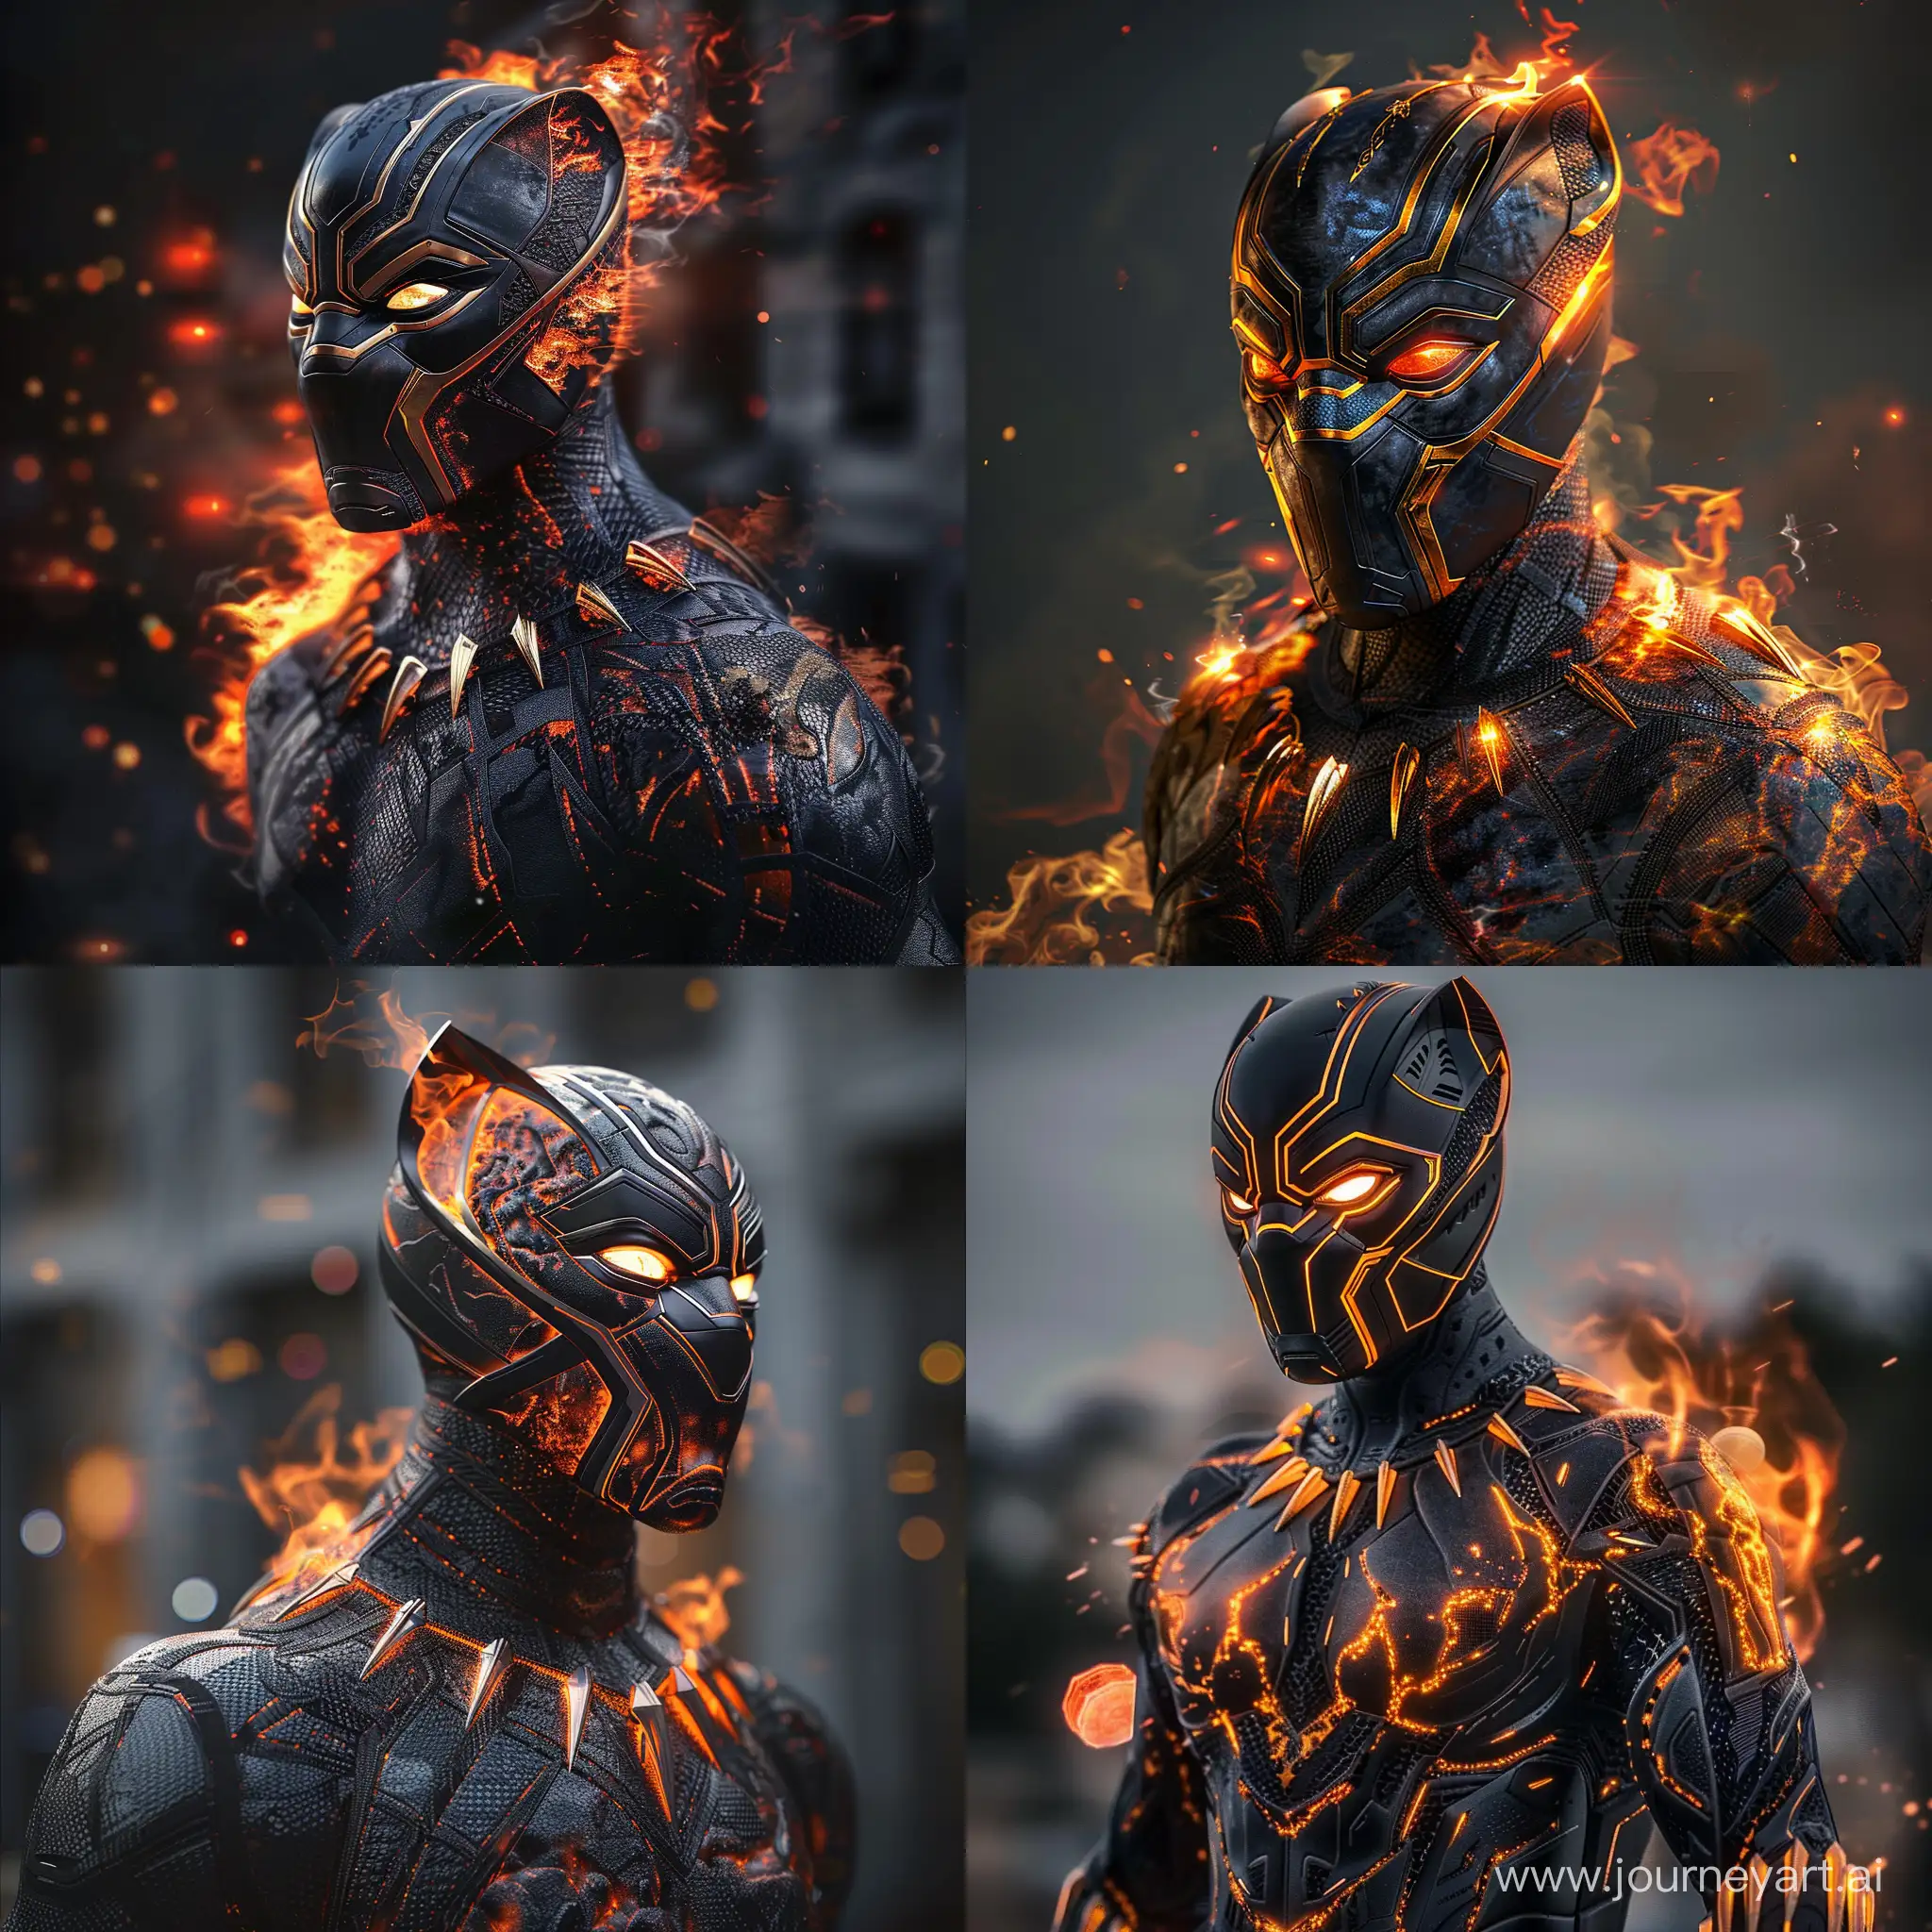 Hyperrealistic-Black-Panther-Ghost-Rider-Mix-Artwork